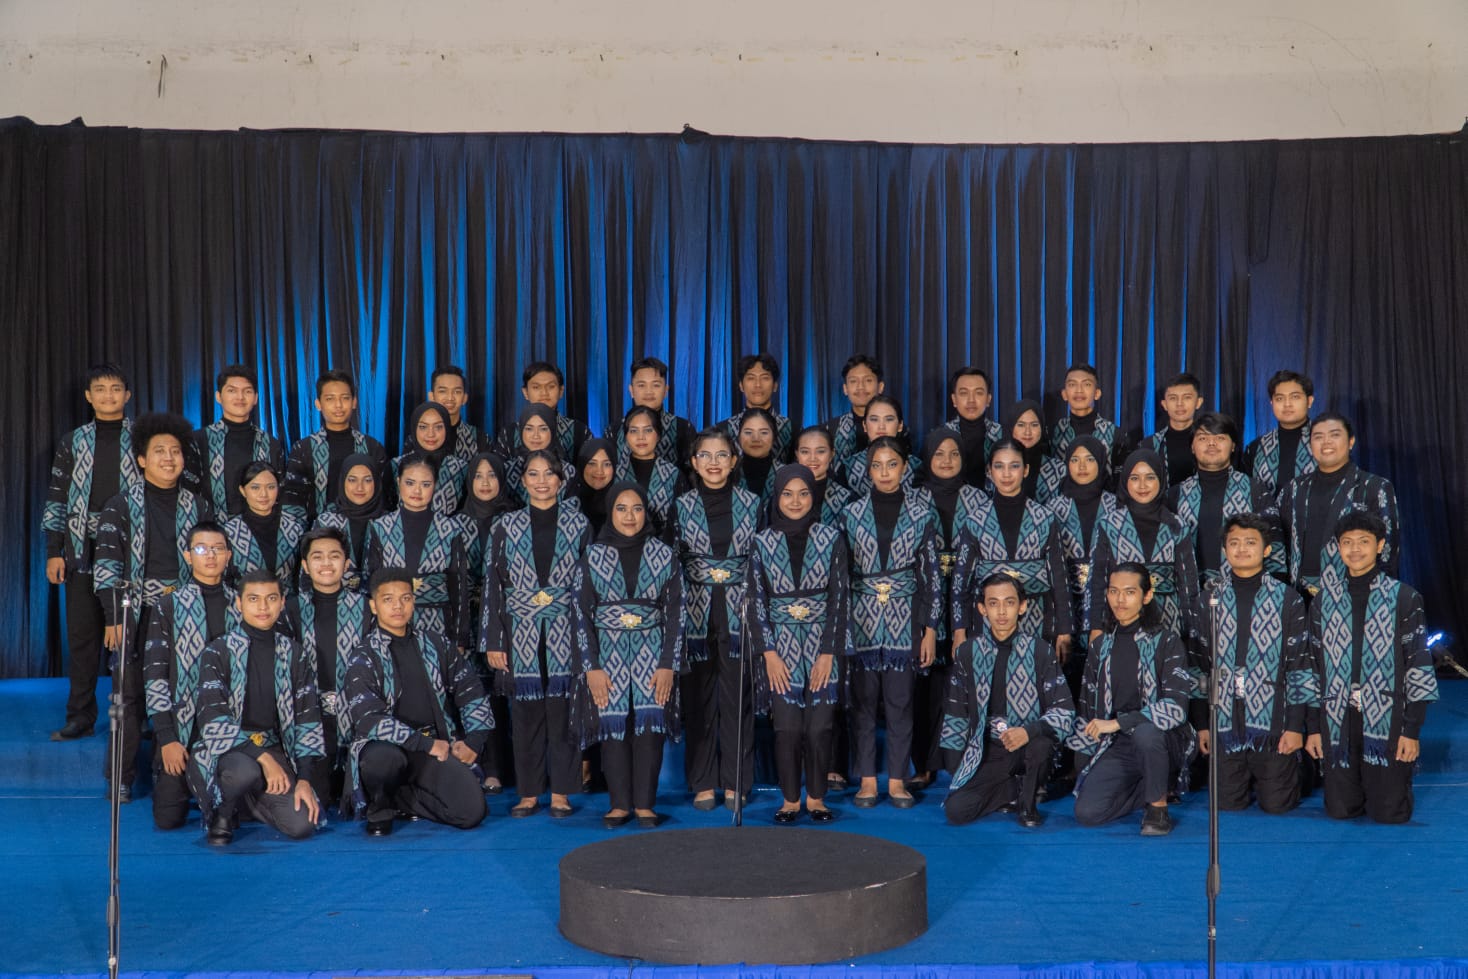 The ITS PSM team when performing for the 10th International Brawijaya Choir Festival 2022 in costumes with traditional West Kalimantan nuances